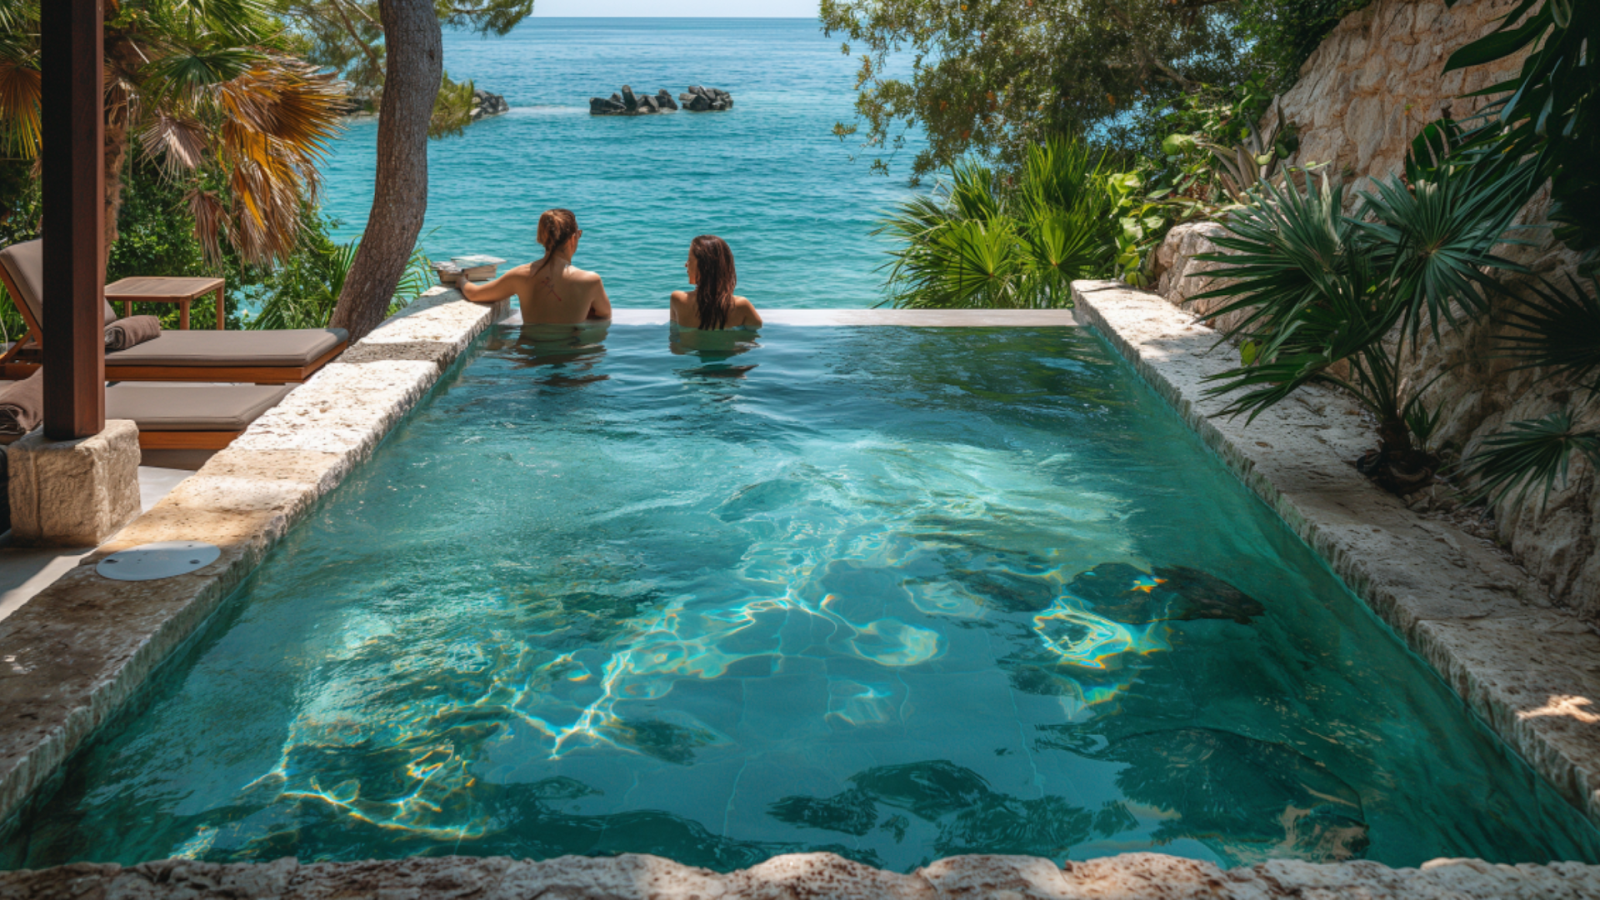 A couple relaxing in a private pool at a luxury Croatian vacation rental, surrounded by lush greenery.